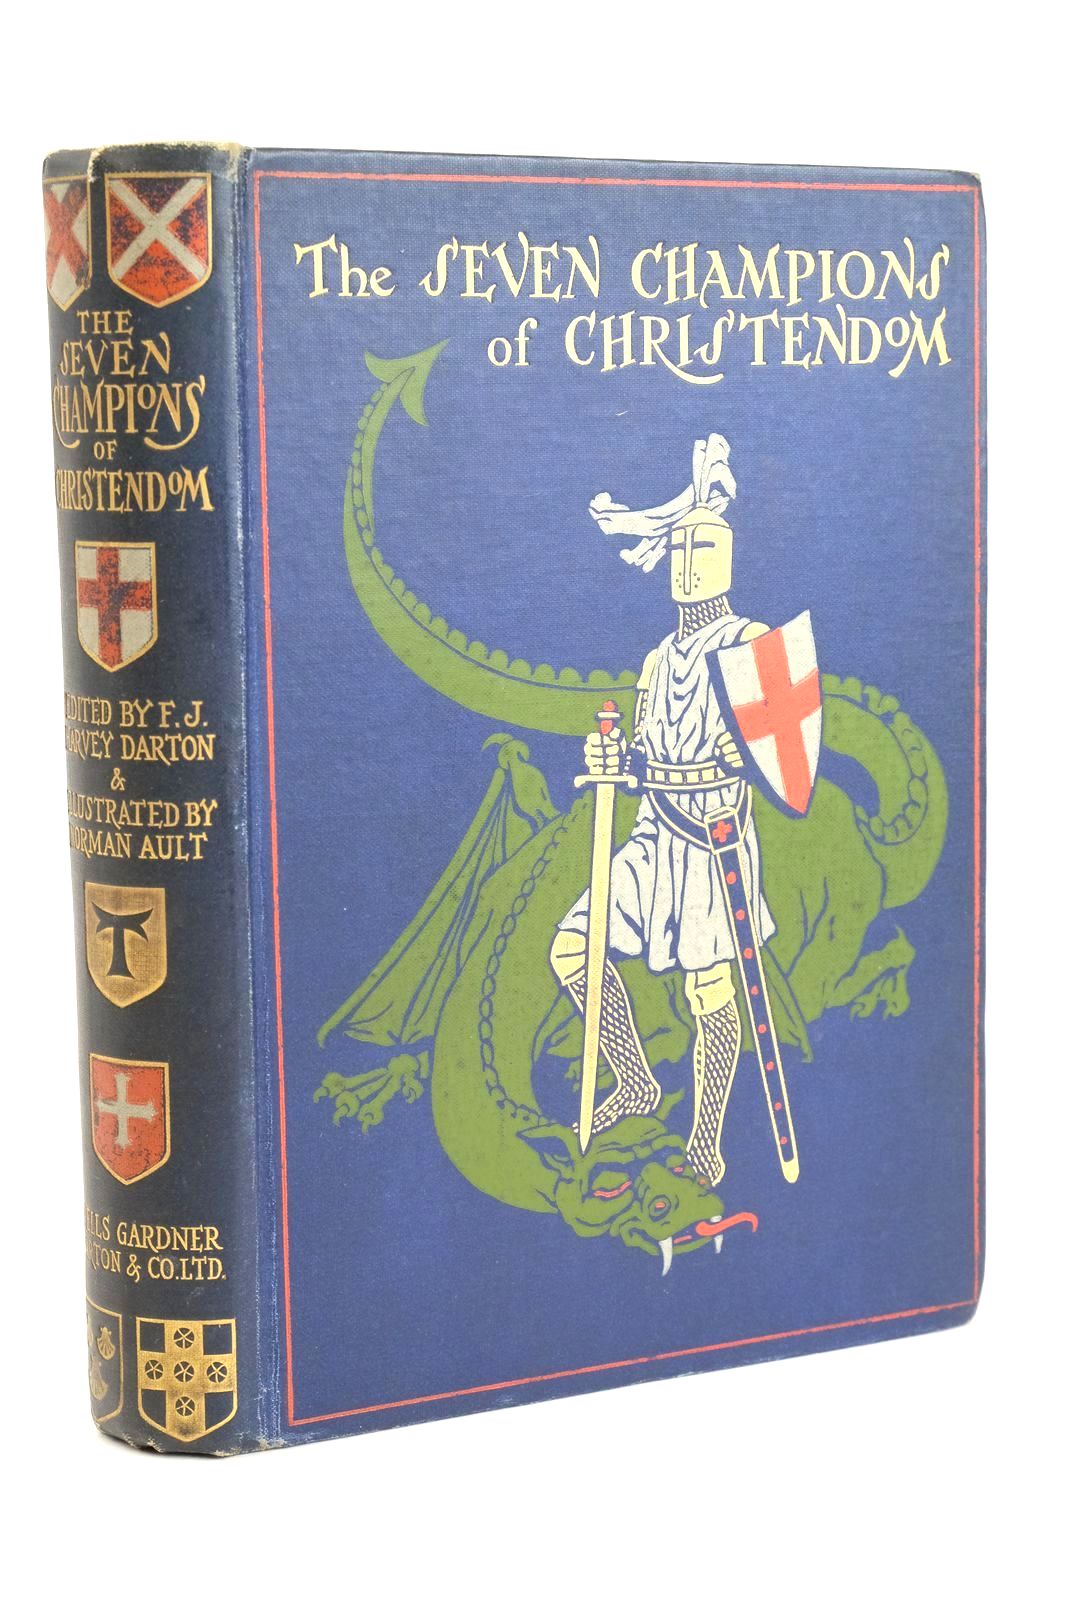 Photo of THE SEVEN CHAMPIONS OF CHRISTENDOM written by Darton, F.J. Harvey illustrated by Ault, Norman published by Wells Gardner, Darton & Co. Ltd. (STOCK CODE: 1323677)  for sale by Stella & Rose's Books